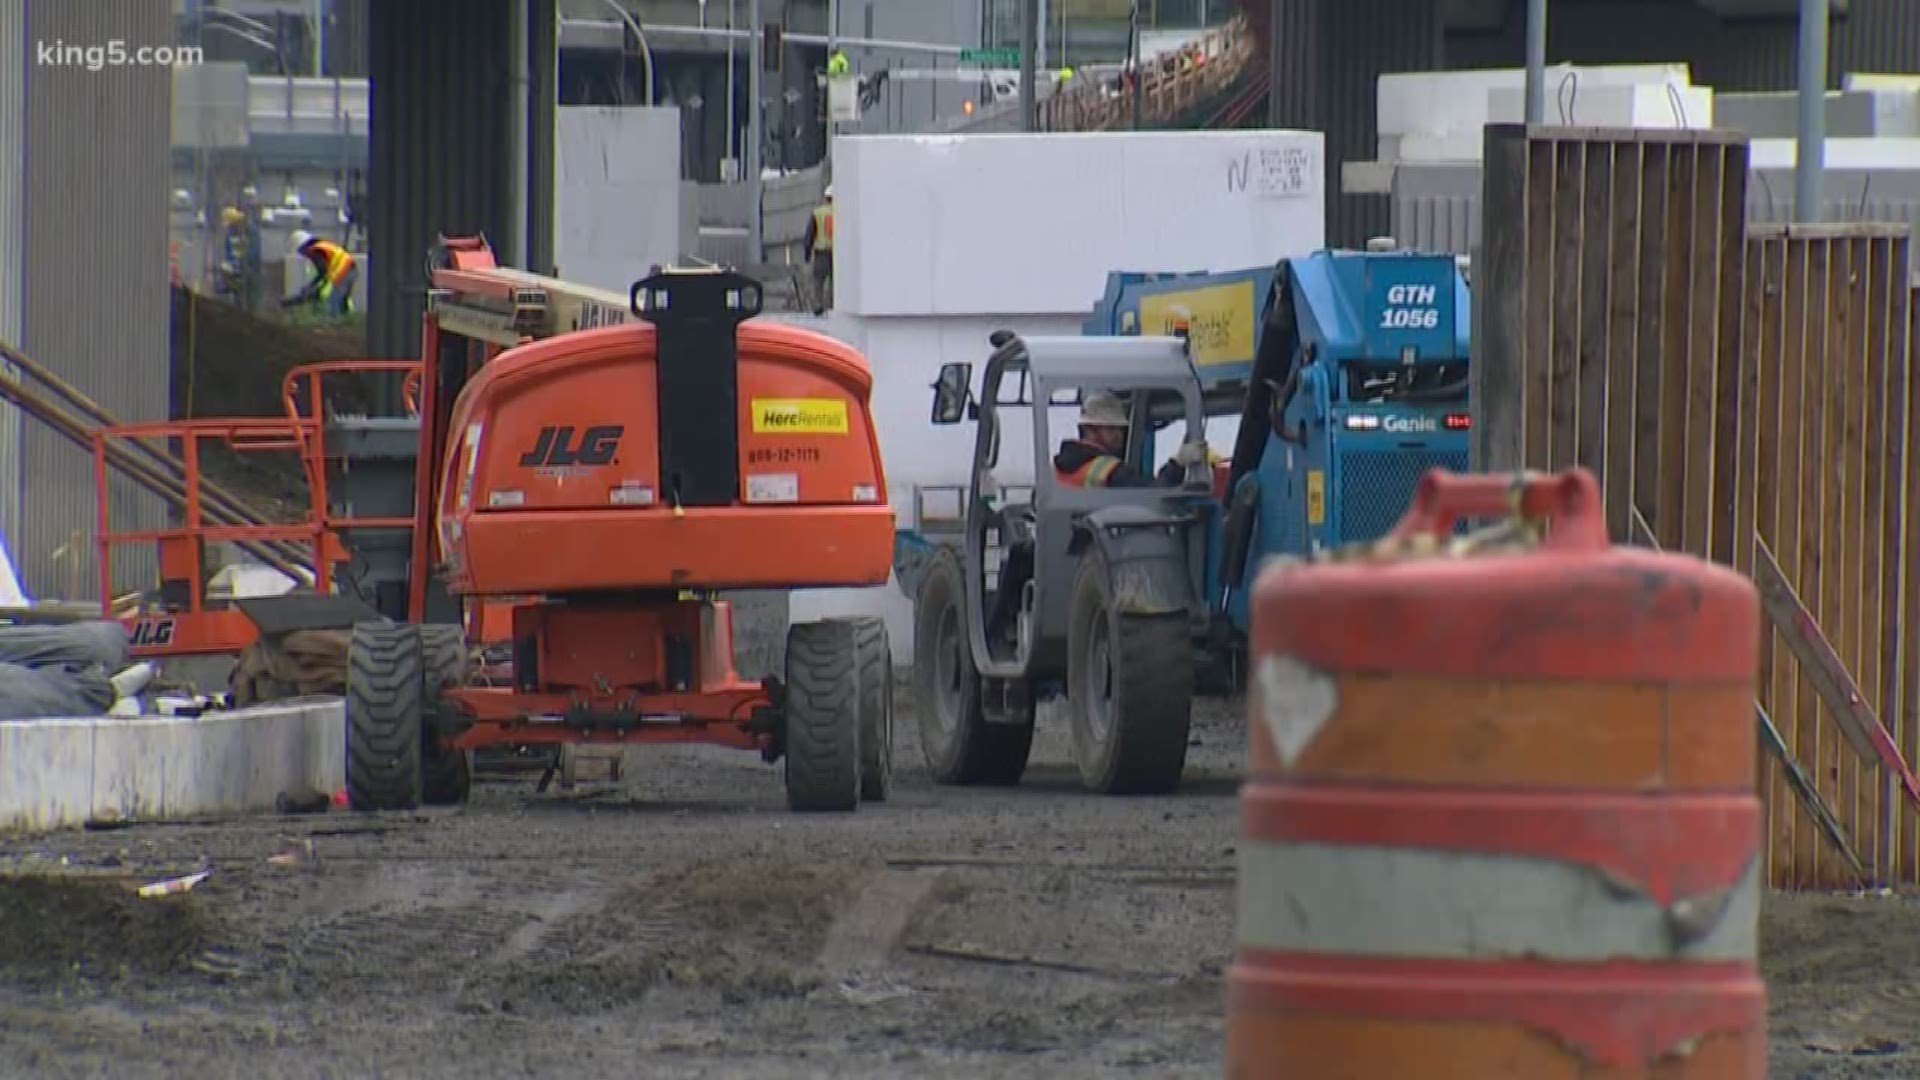 As Glenn Farley tells us, contractors are working fast to disconnect the Viaduct and hook up the roads to the tunnel.